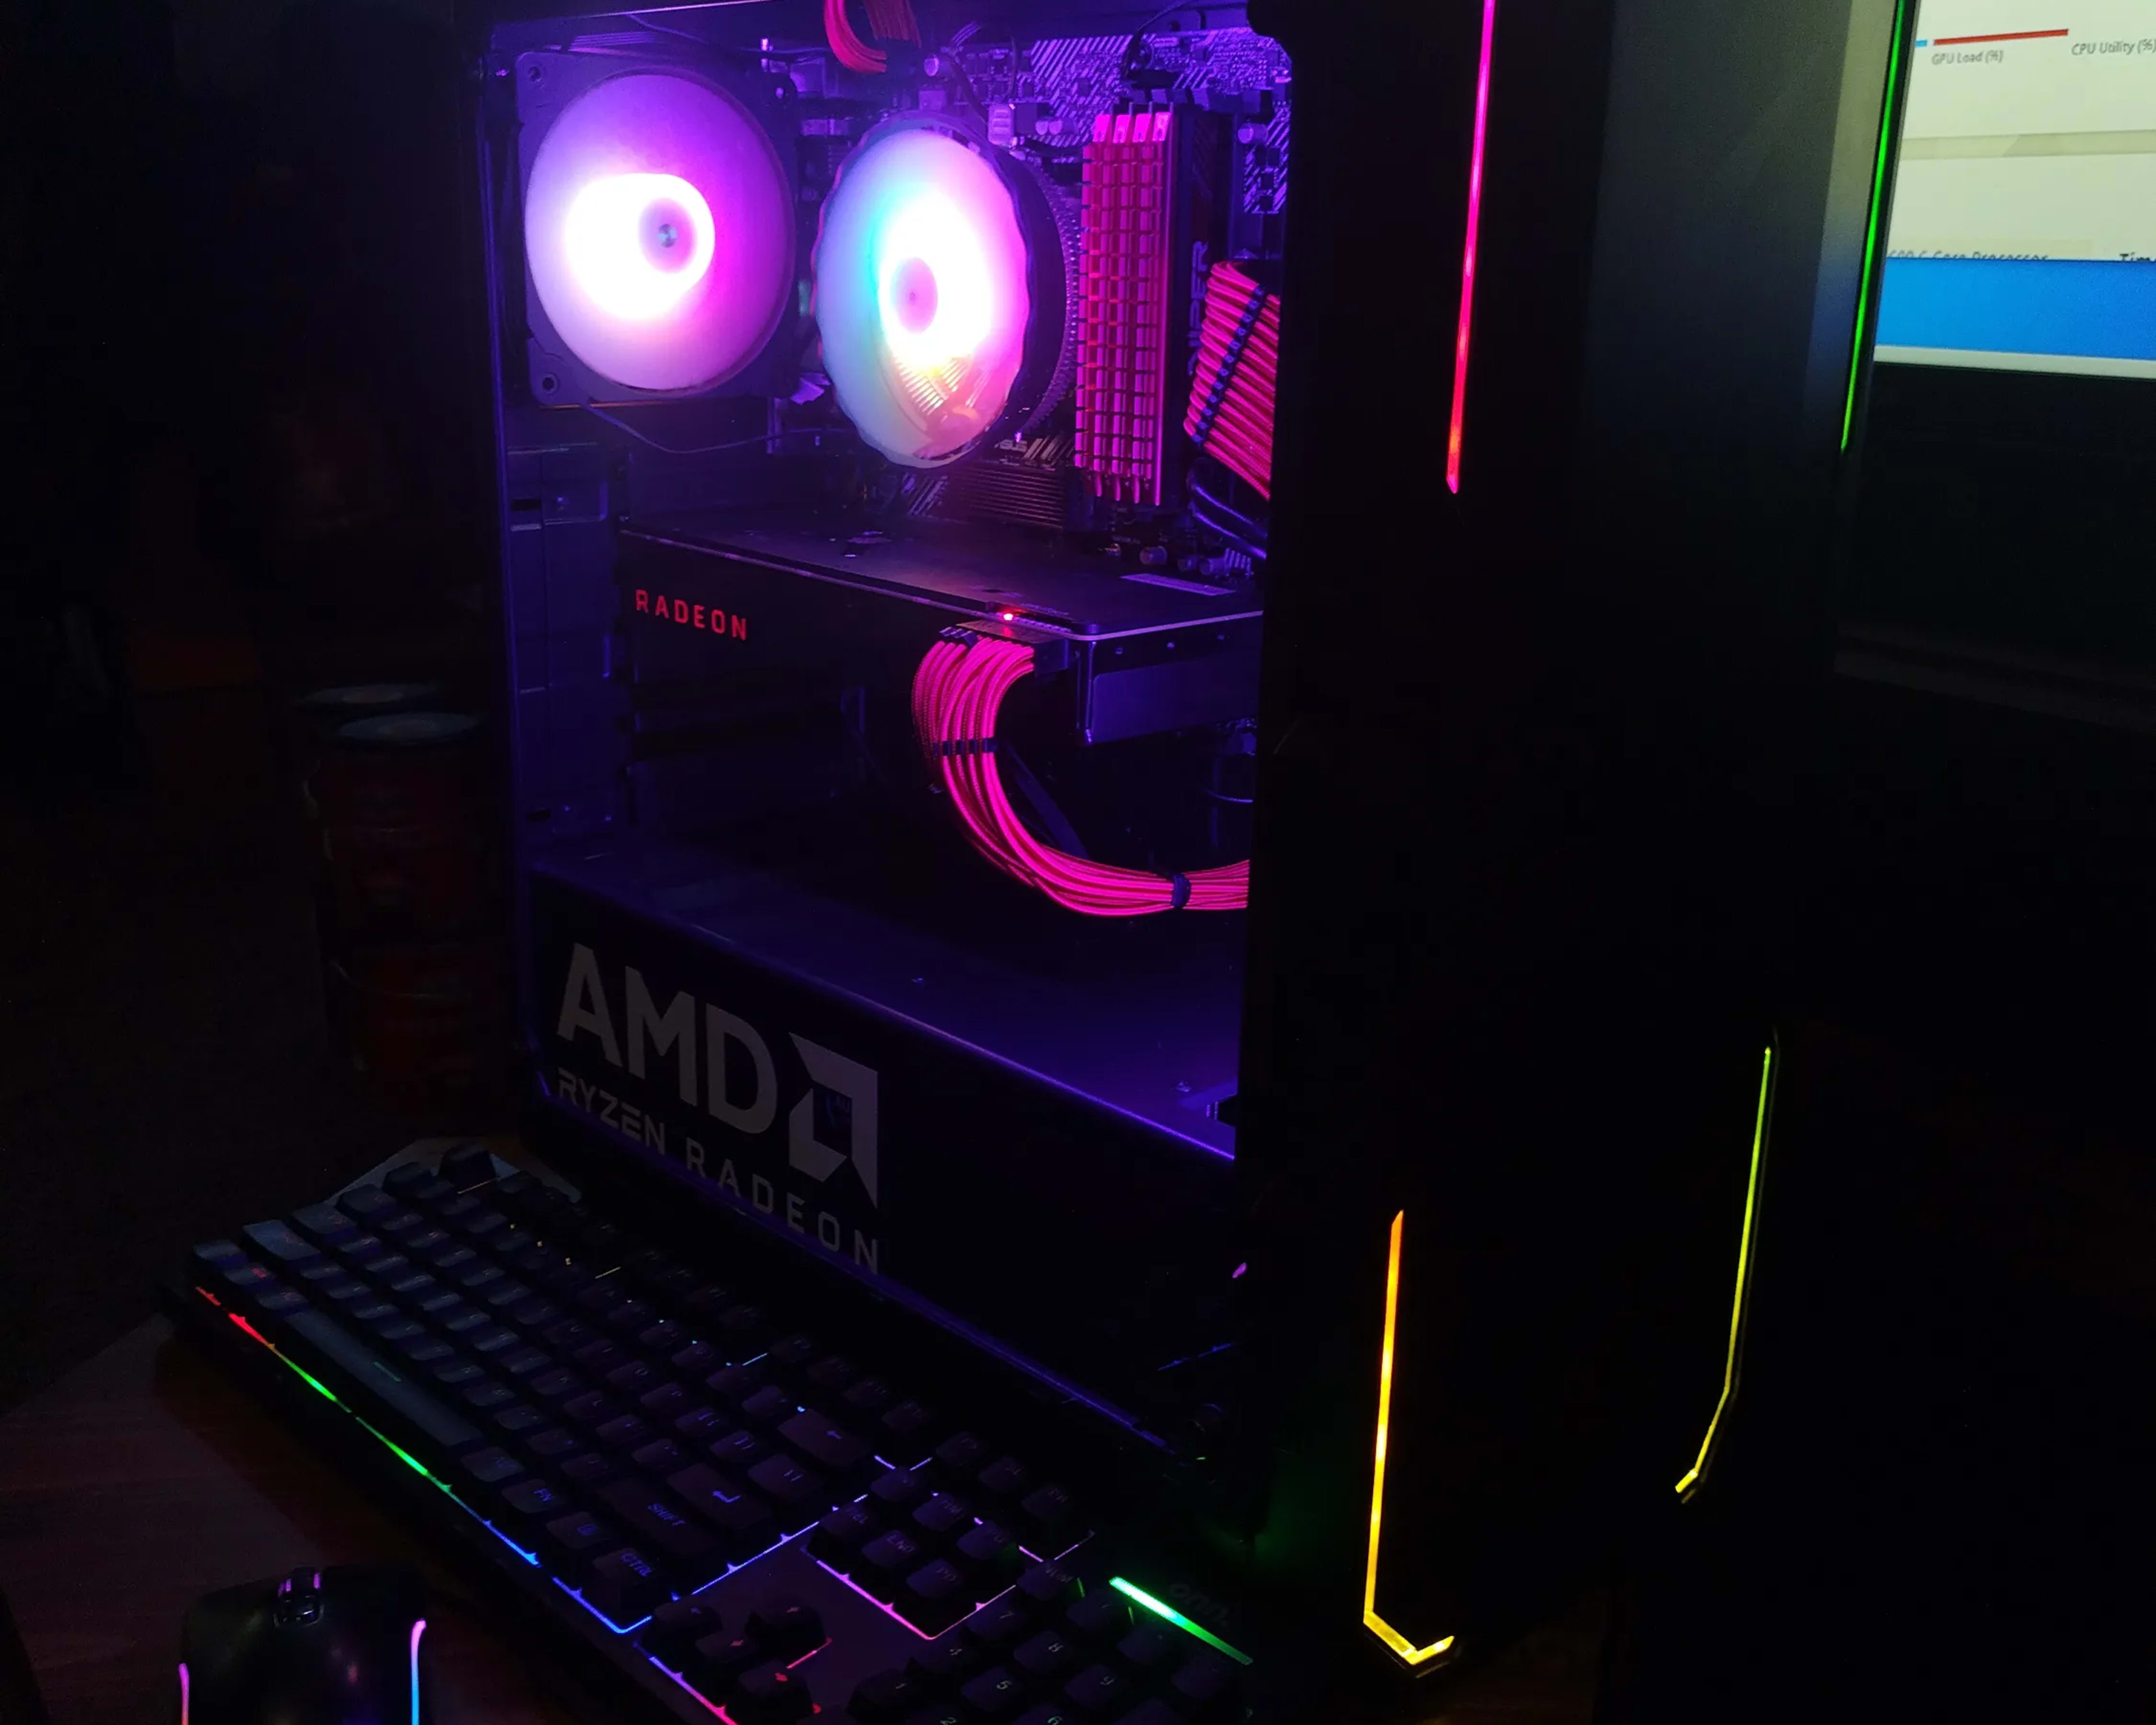 Foundation PC - Gaming Now With Great Upgrade Path